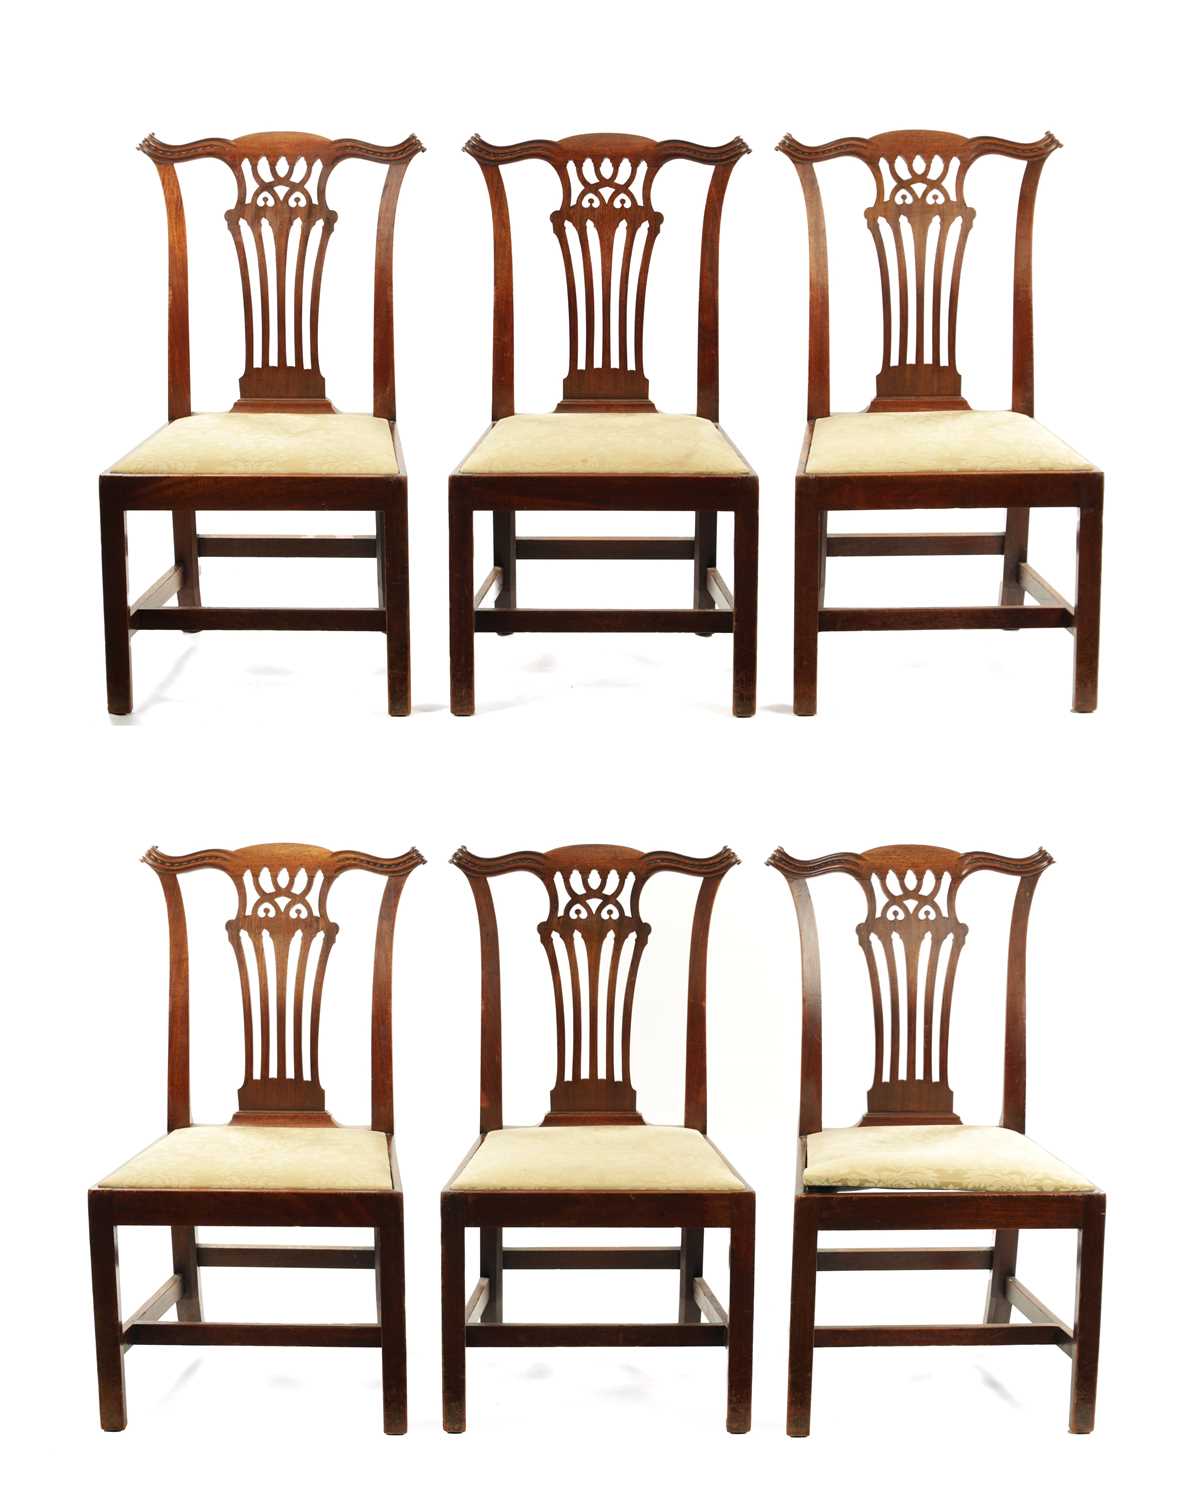 Lot 217 - A FINE ORIGINAL SET OF SIX GEORGE III CHIPPENDALE PERIOD MAHOGANY PIERCED SPLAT BACK  DINING CHAIRS